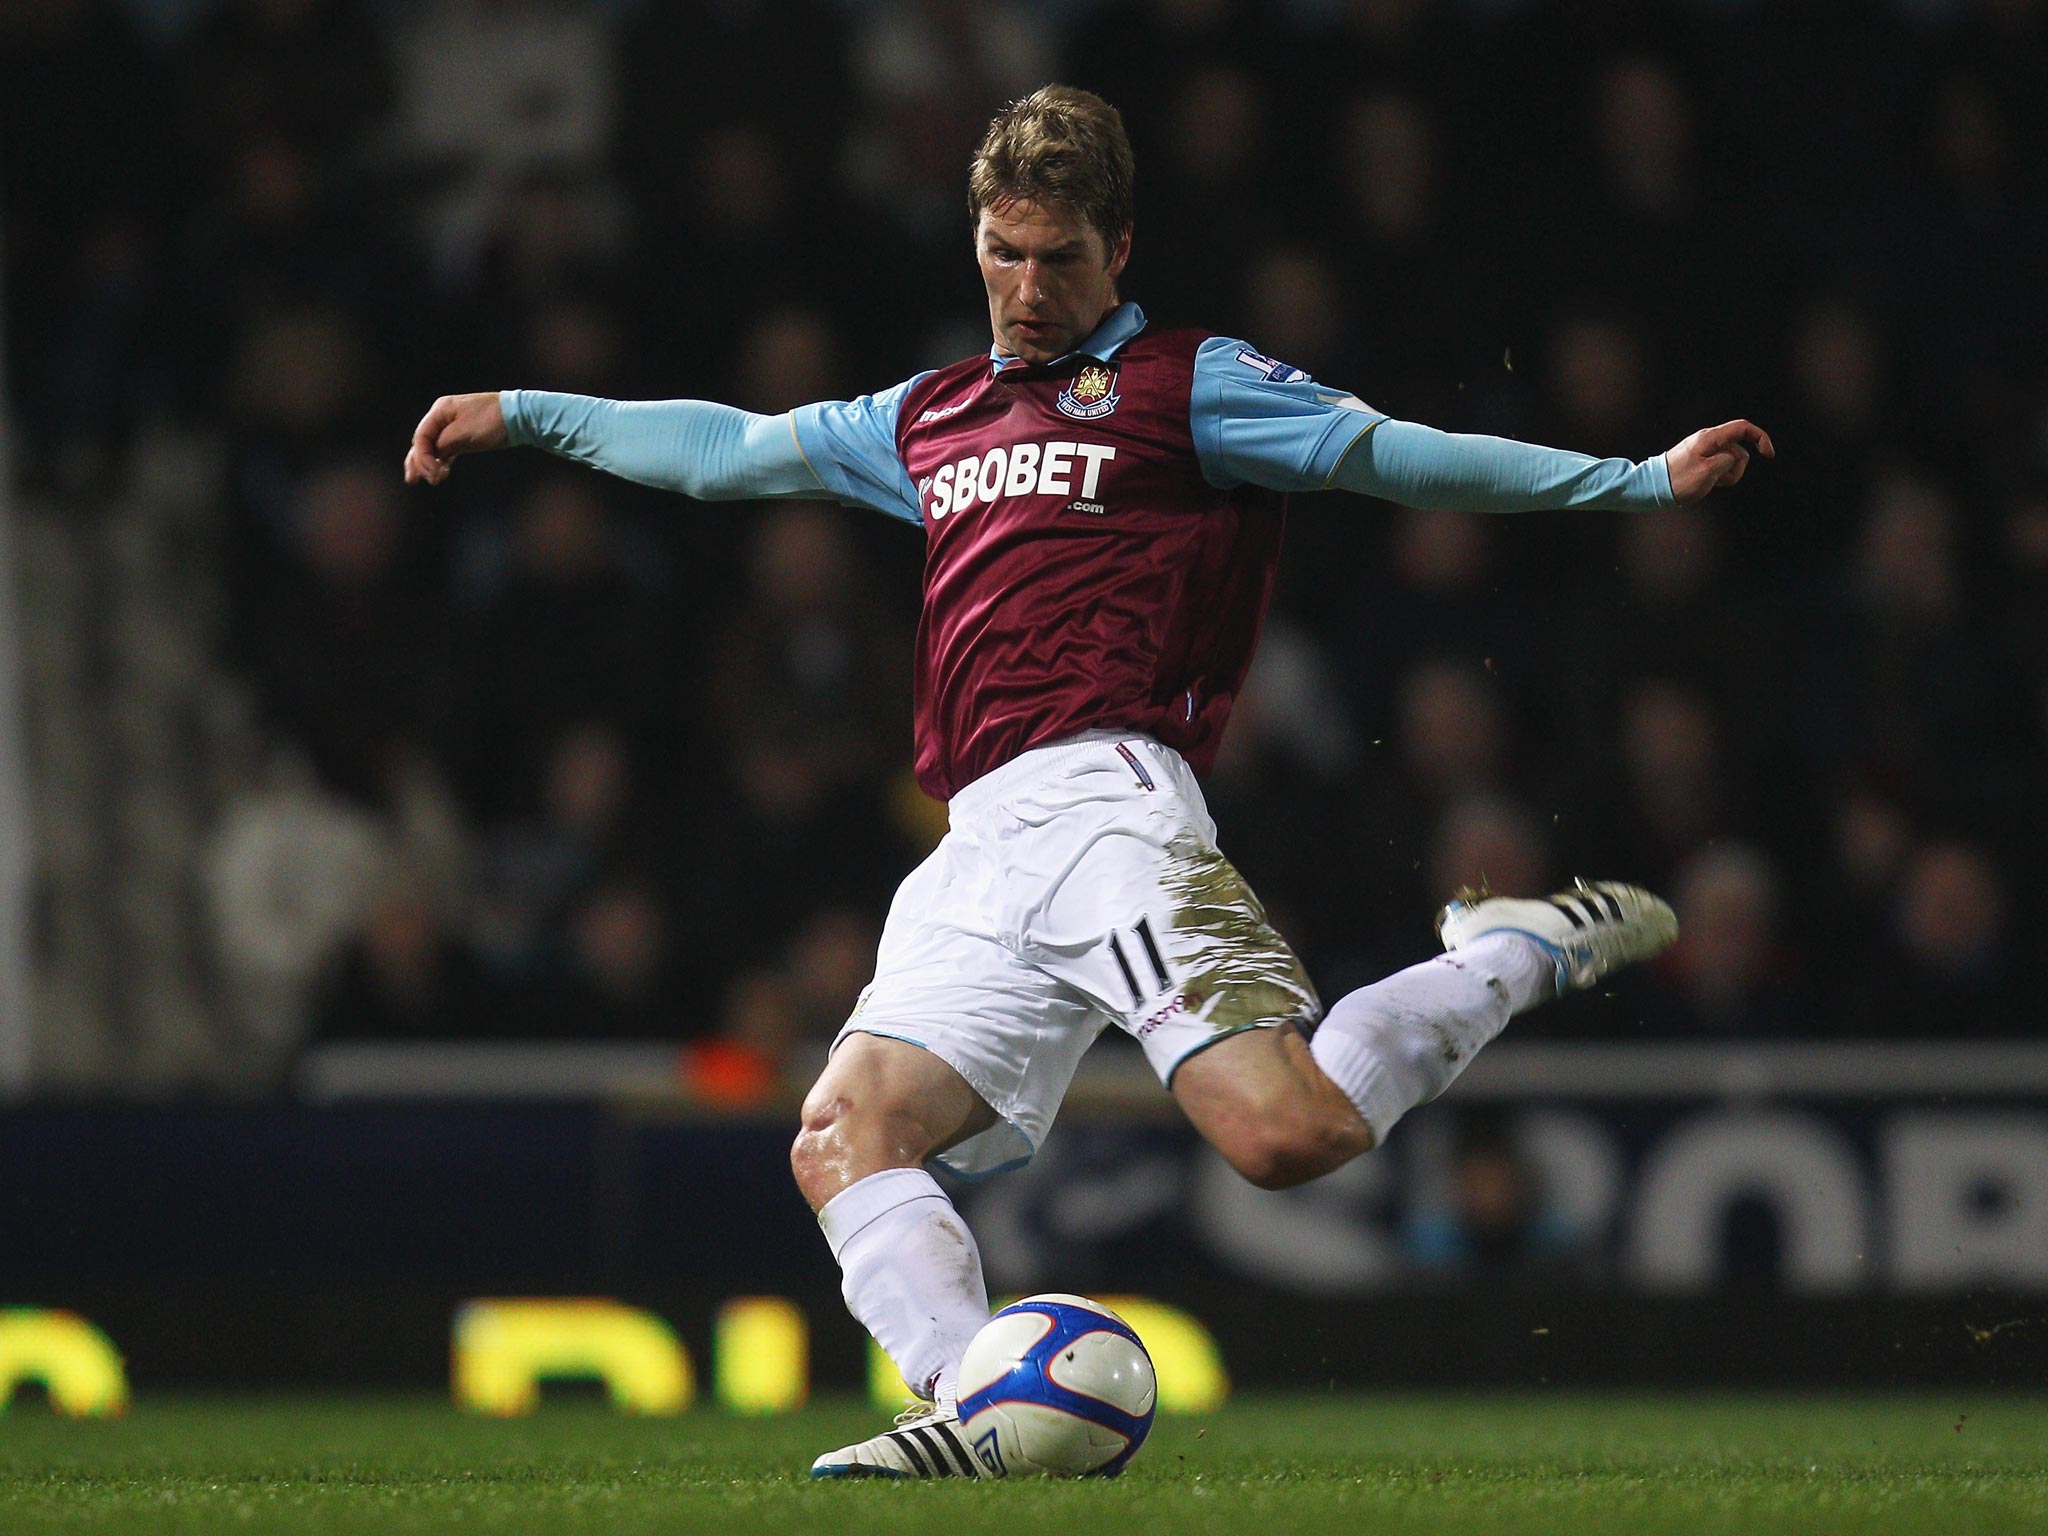 Thomas Hitzlsperger of West Ham United shoots to score the opening goal during the FA Cup in 2011